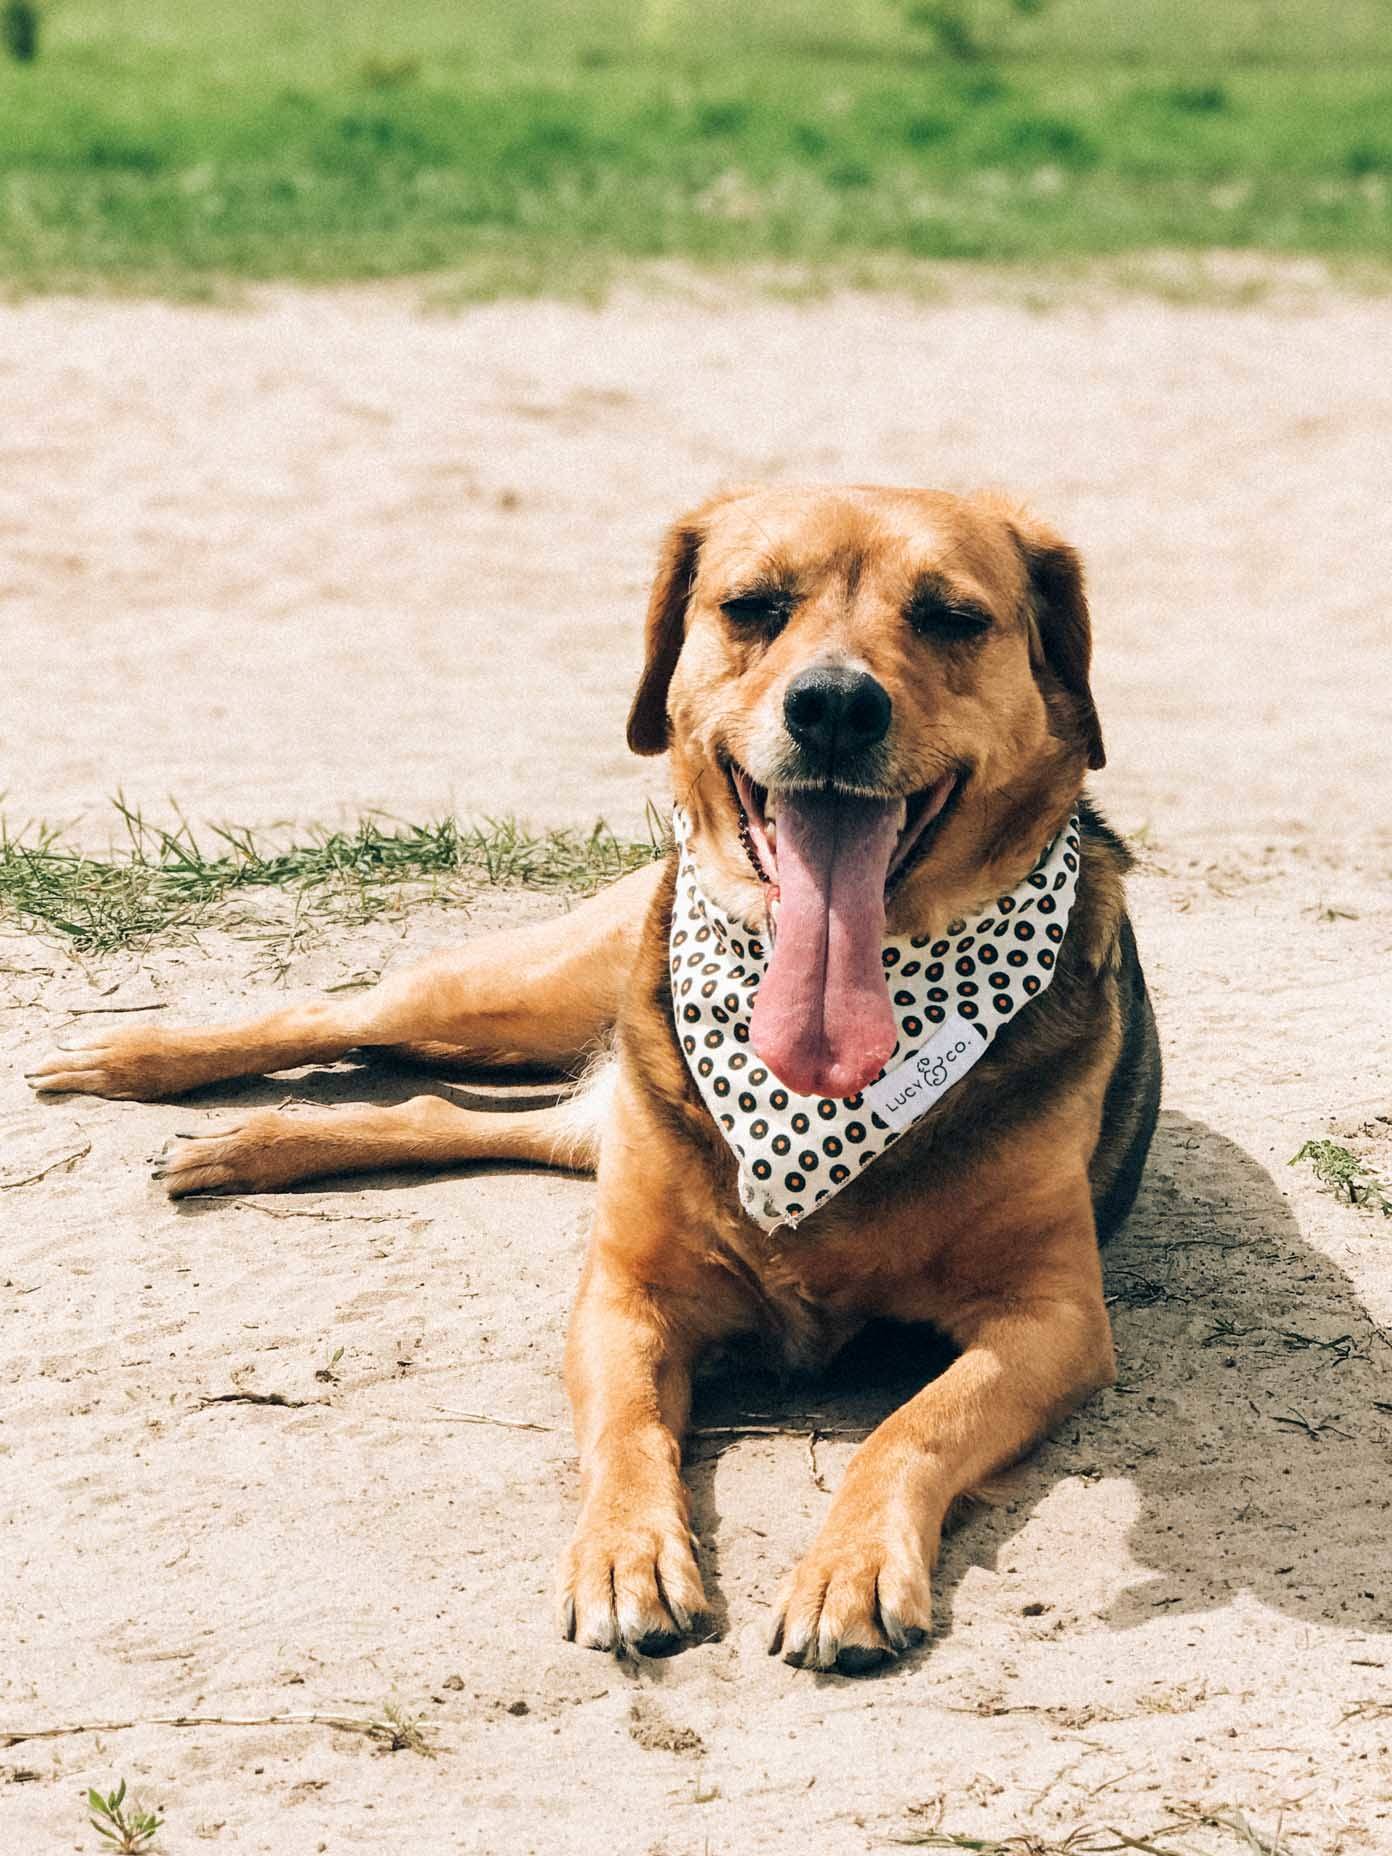 Dog with a bandana resting on a hot day.